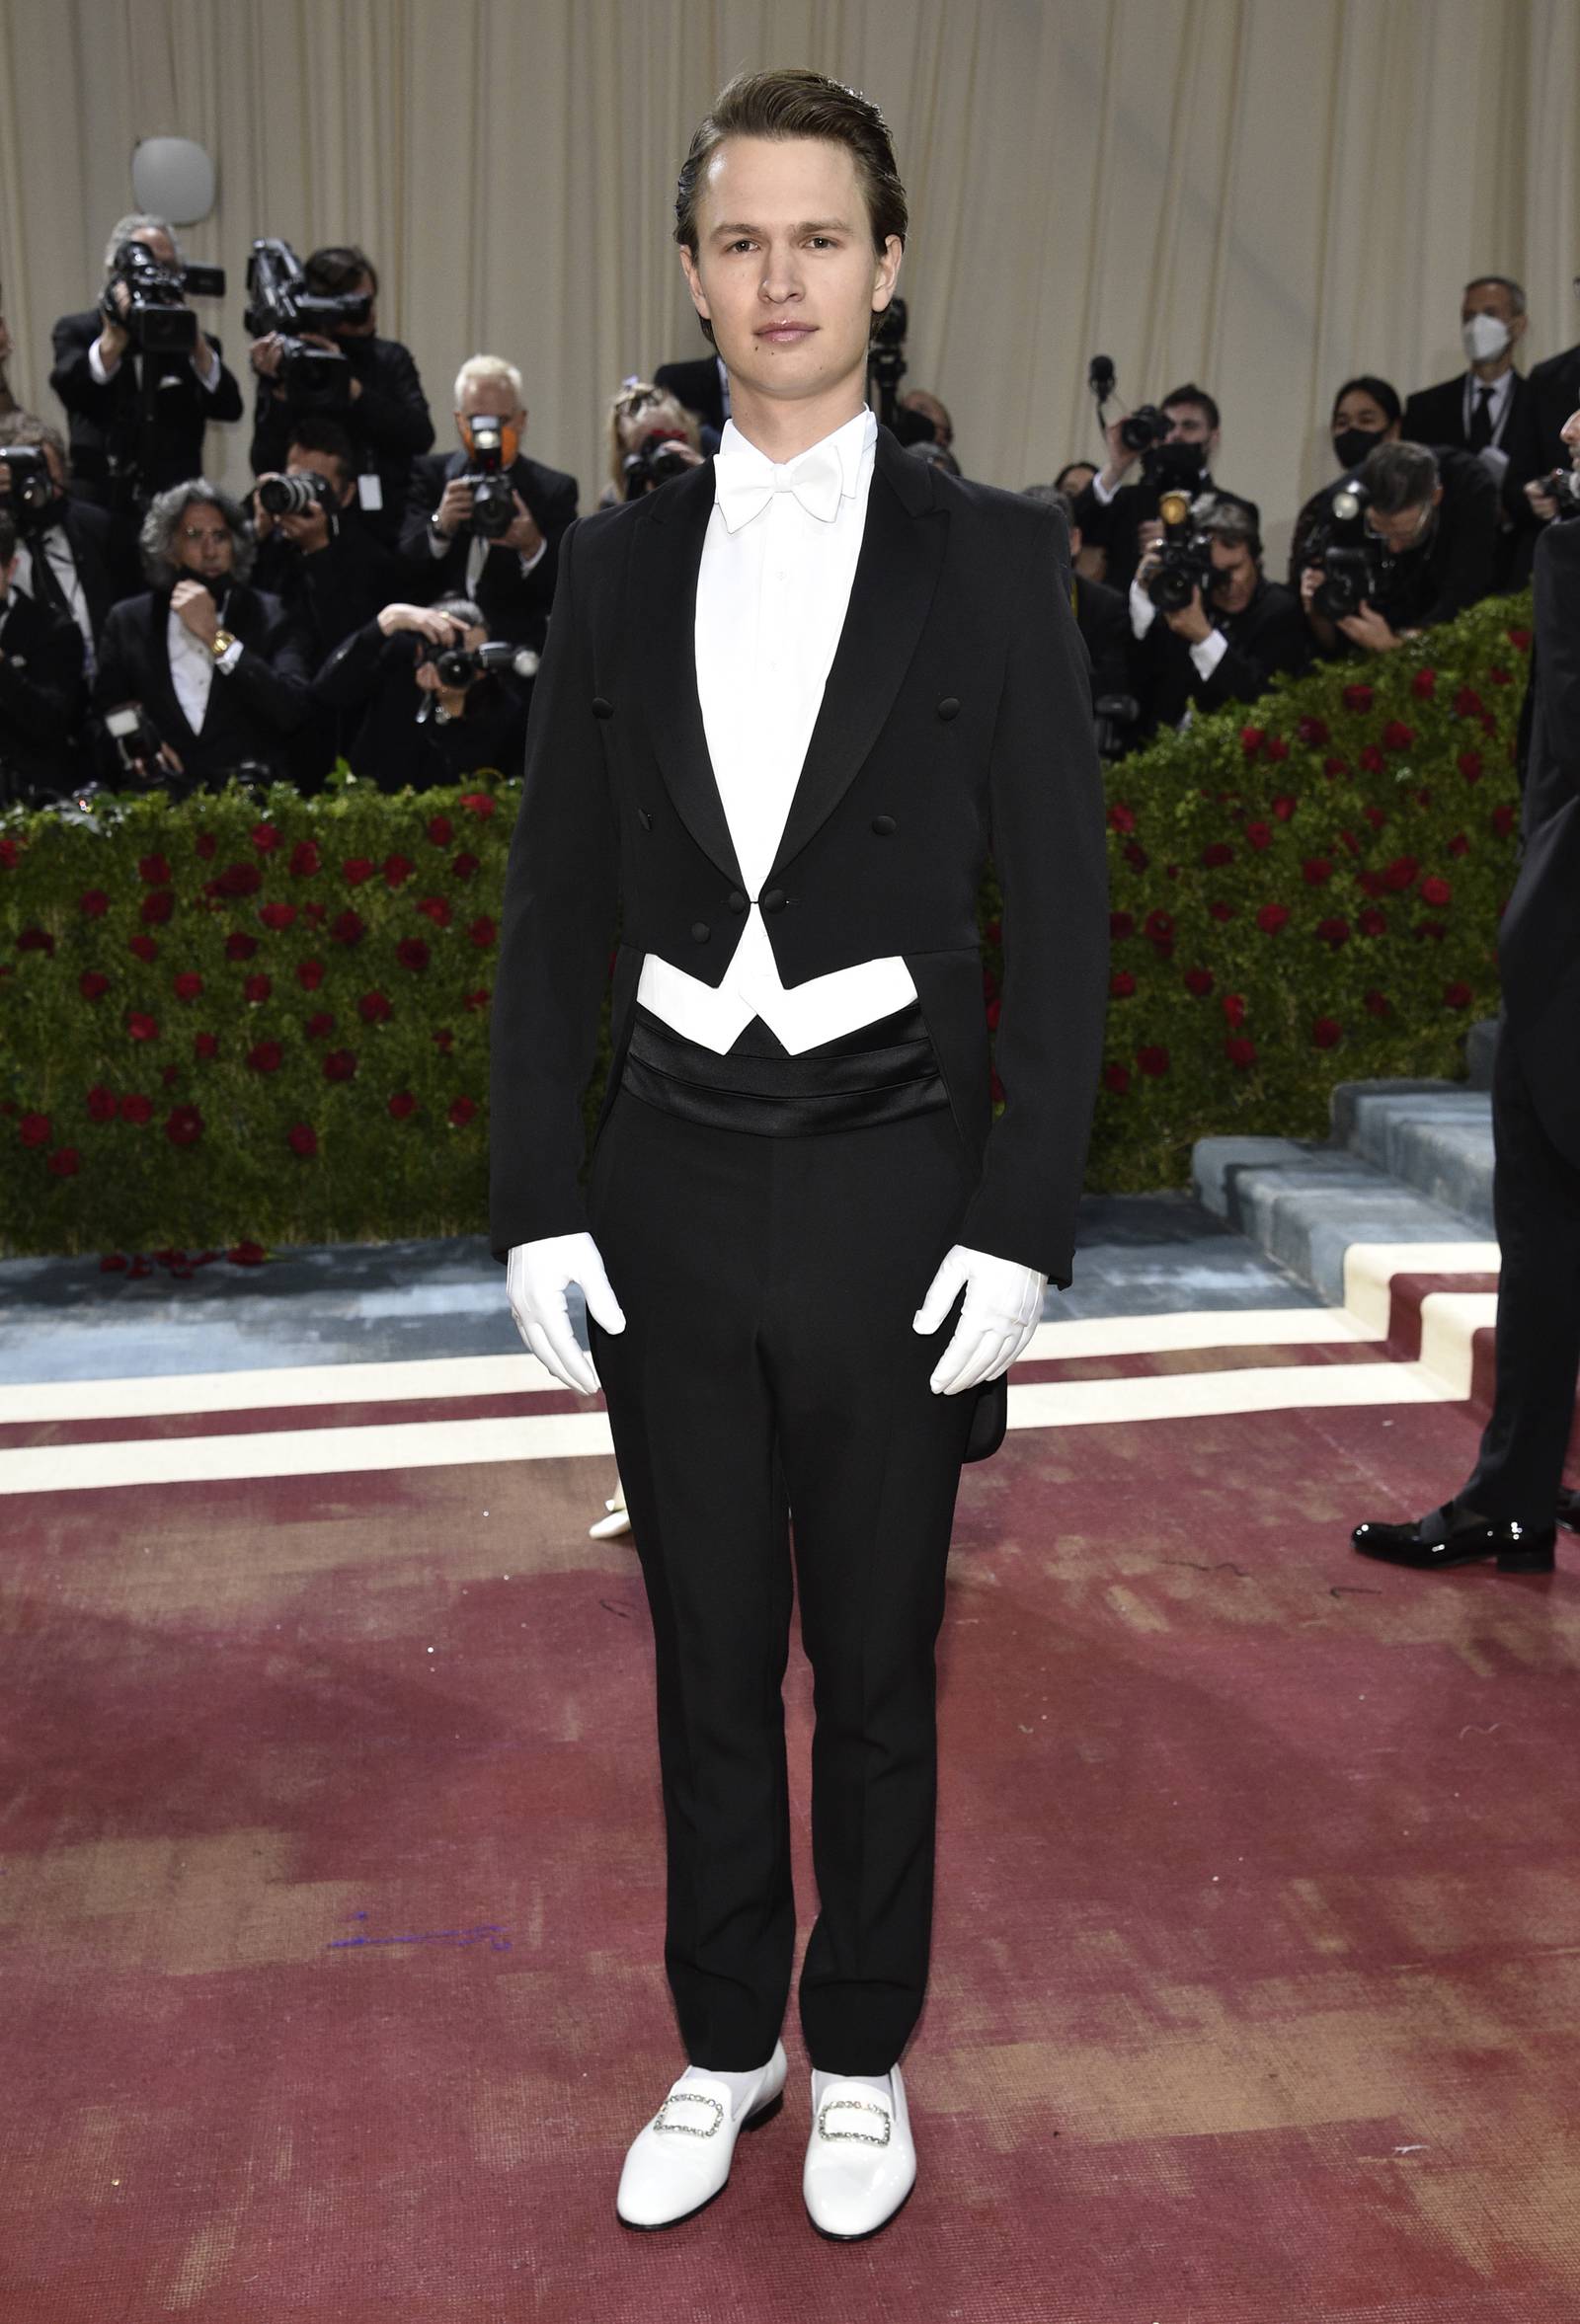 Men at the Met Gala 2022: stars who stuck to the white tie dress code